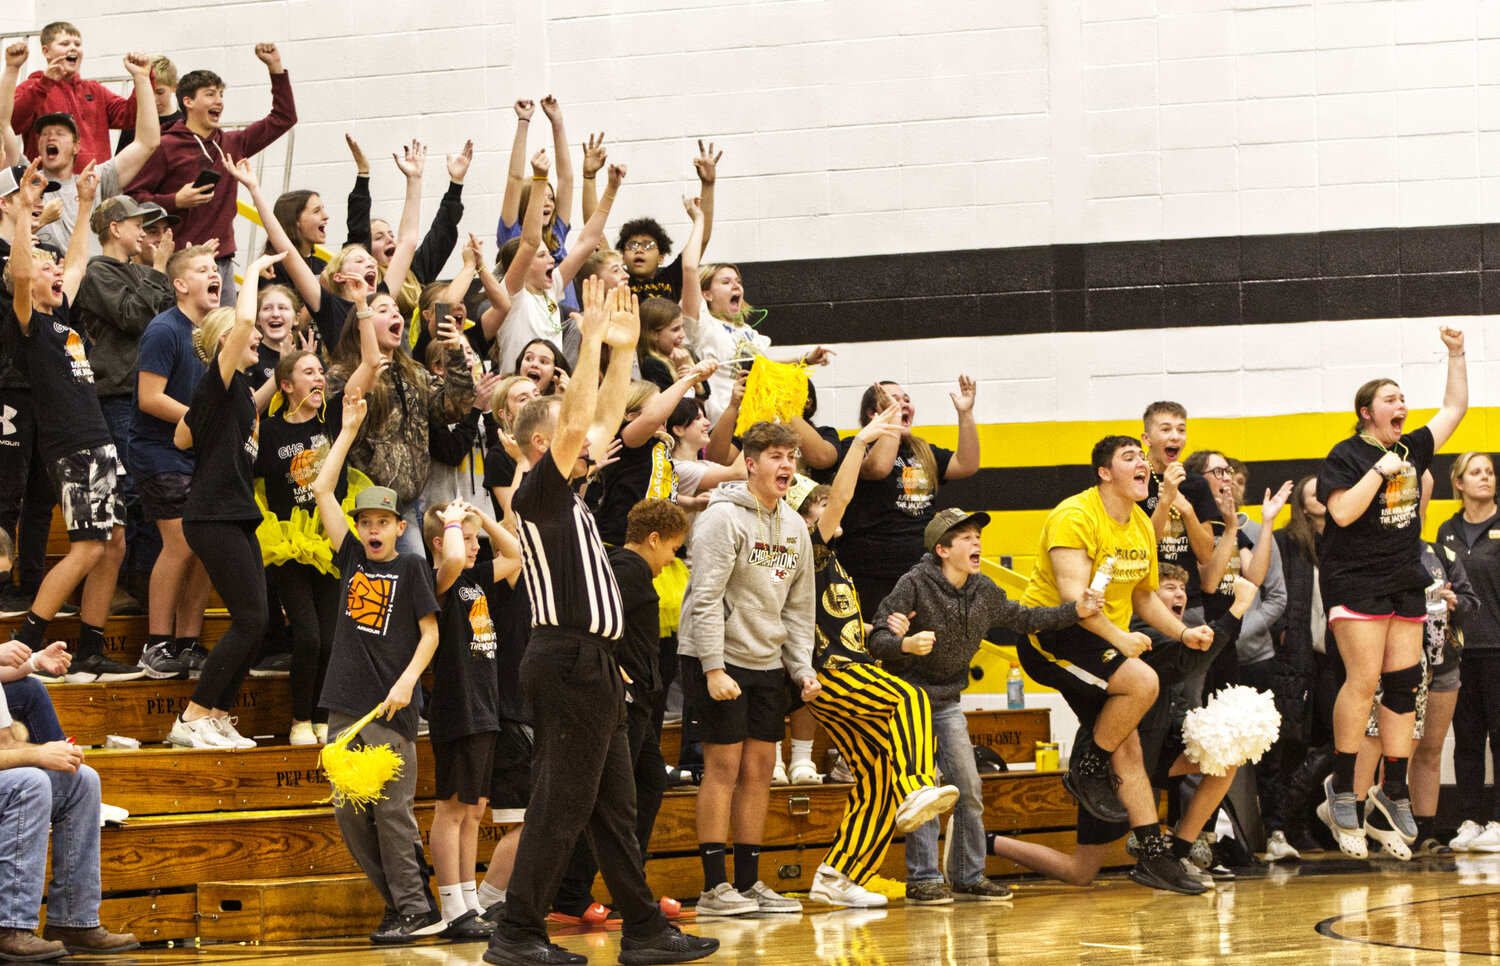 The Glasgow crowd went wild when a 3-point shot put the Yellowjackets over the century mark against Fayette.